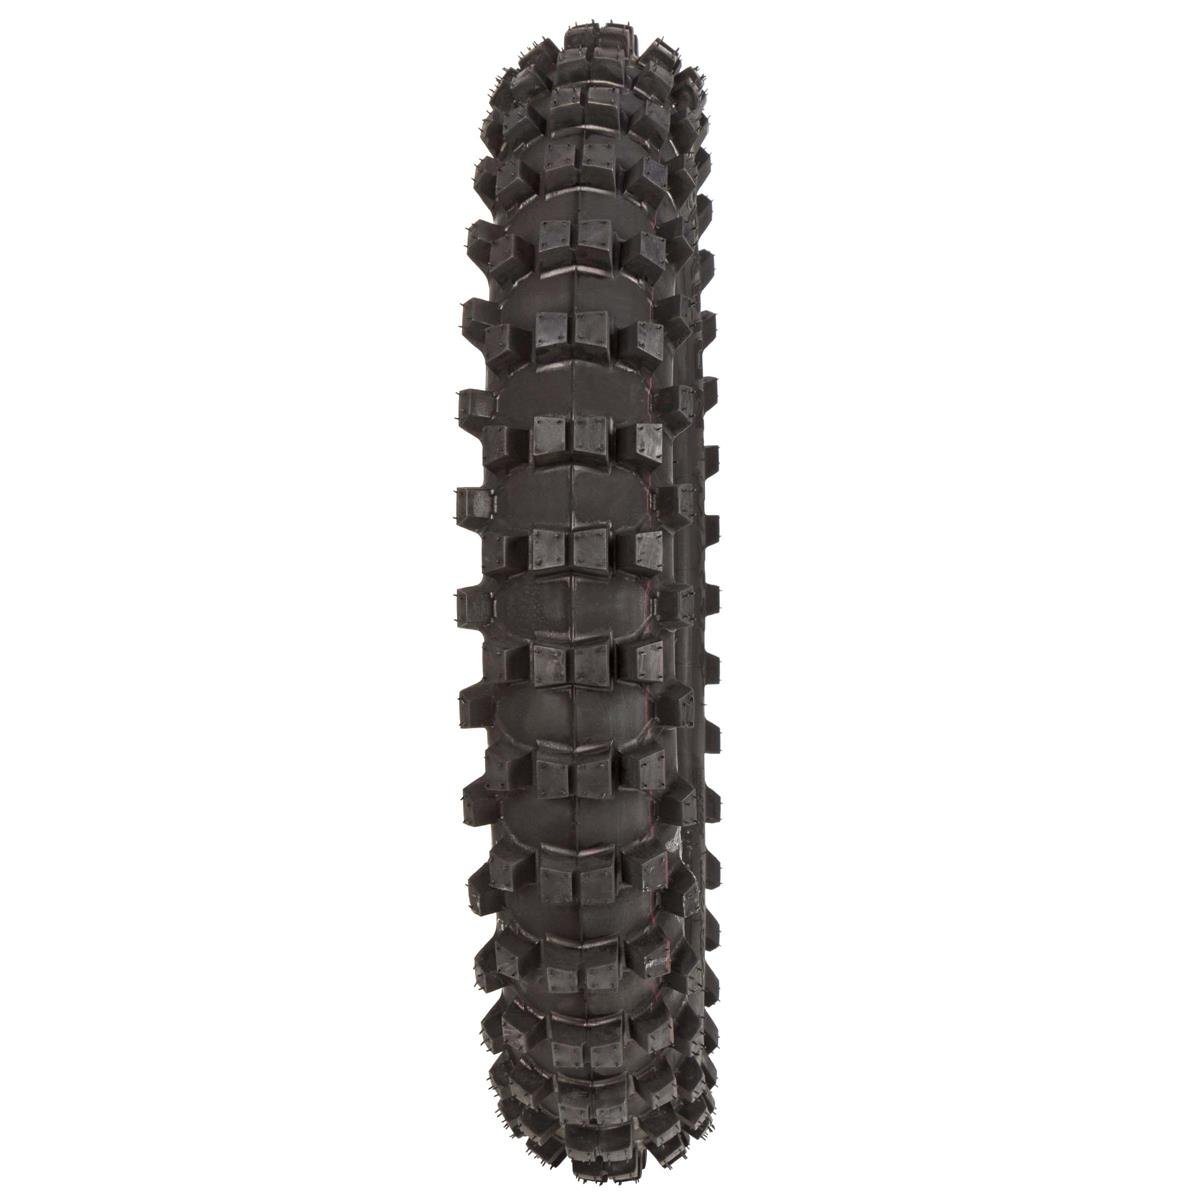 Pirelli Scorpion MX32 Mid Soft Dirt Bike Front and Rear Motocross Tires Set with Inner Tubes and Authentic Pirelli Key Chain 80/100-21 F 90/100-16 R with Tubes 